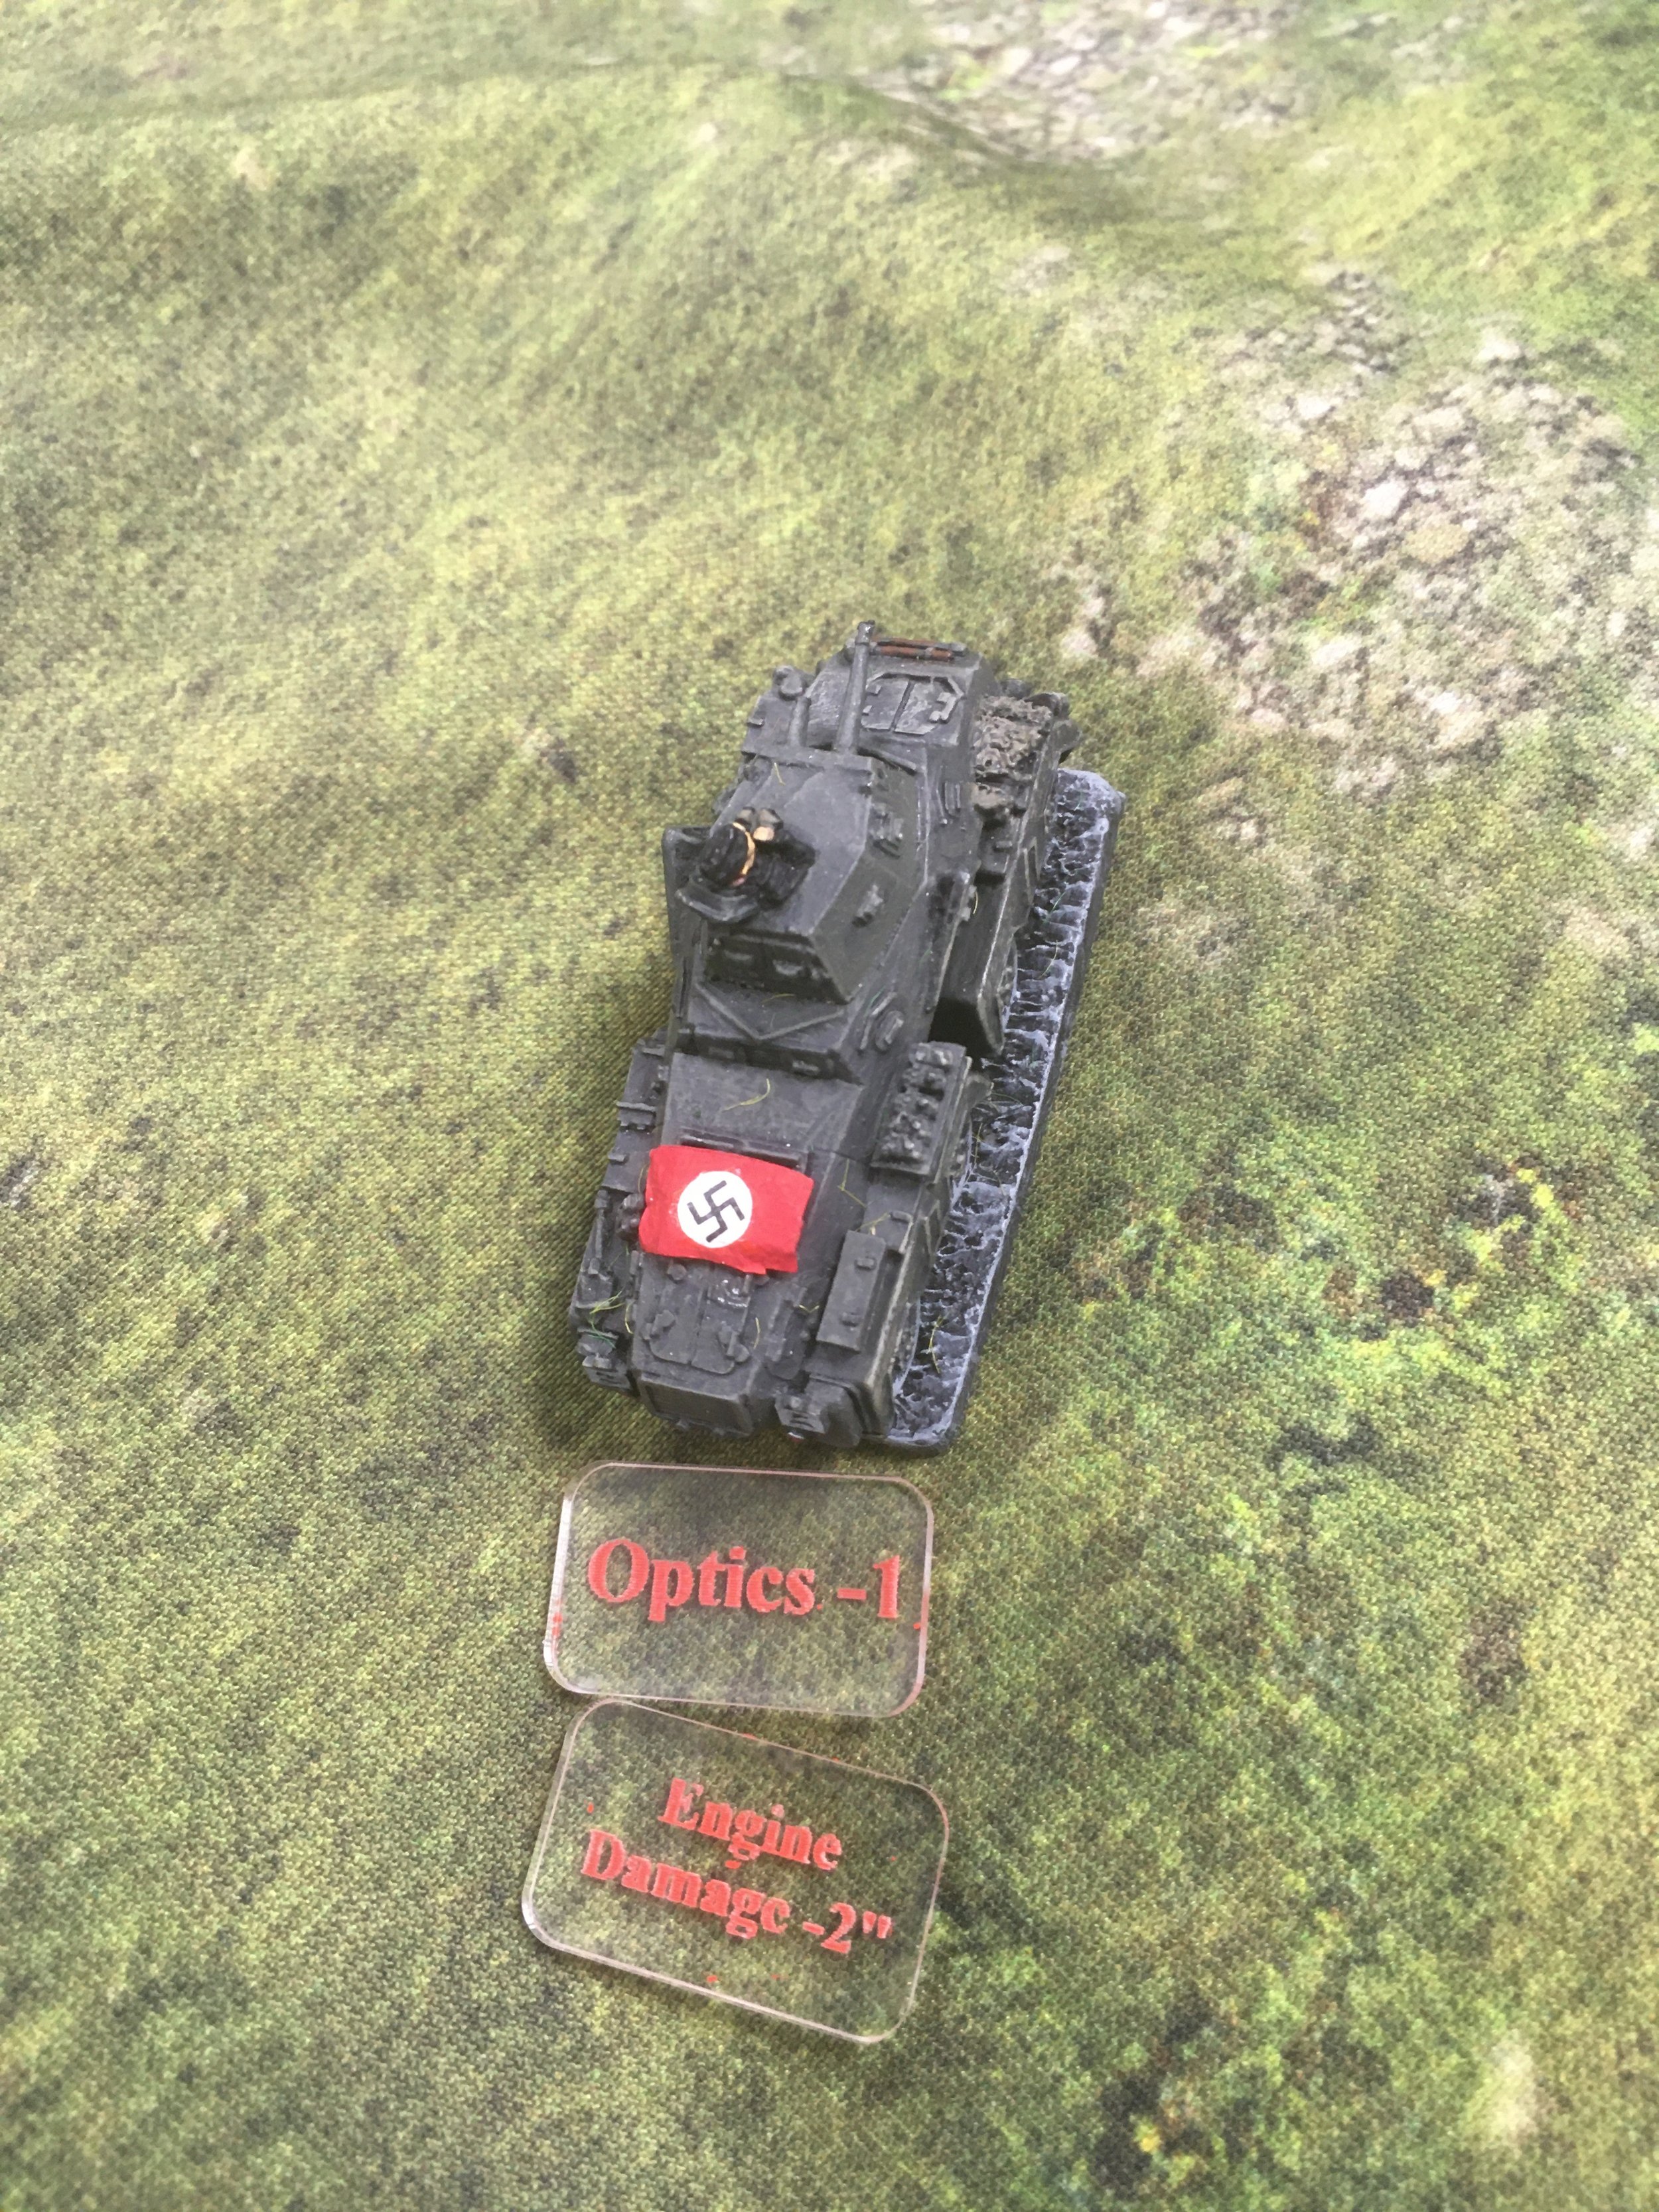 Not however before another AT round hits the Sd.Kfz 231 damaging its engine!